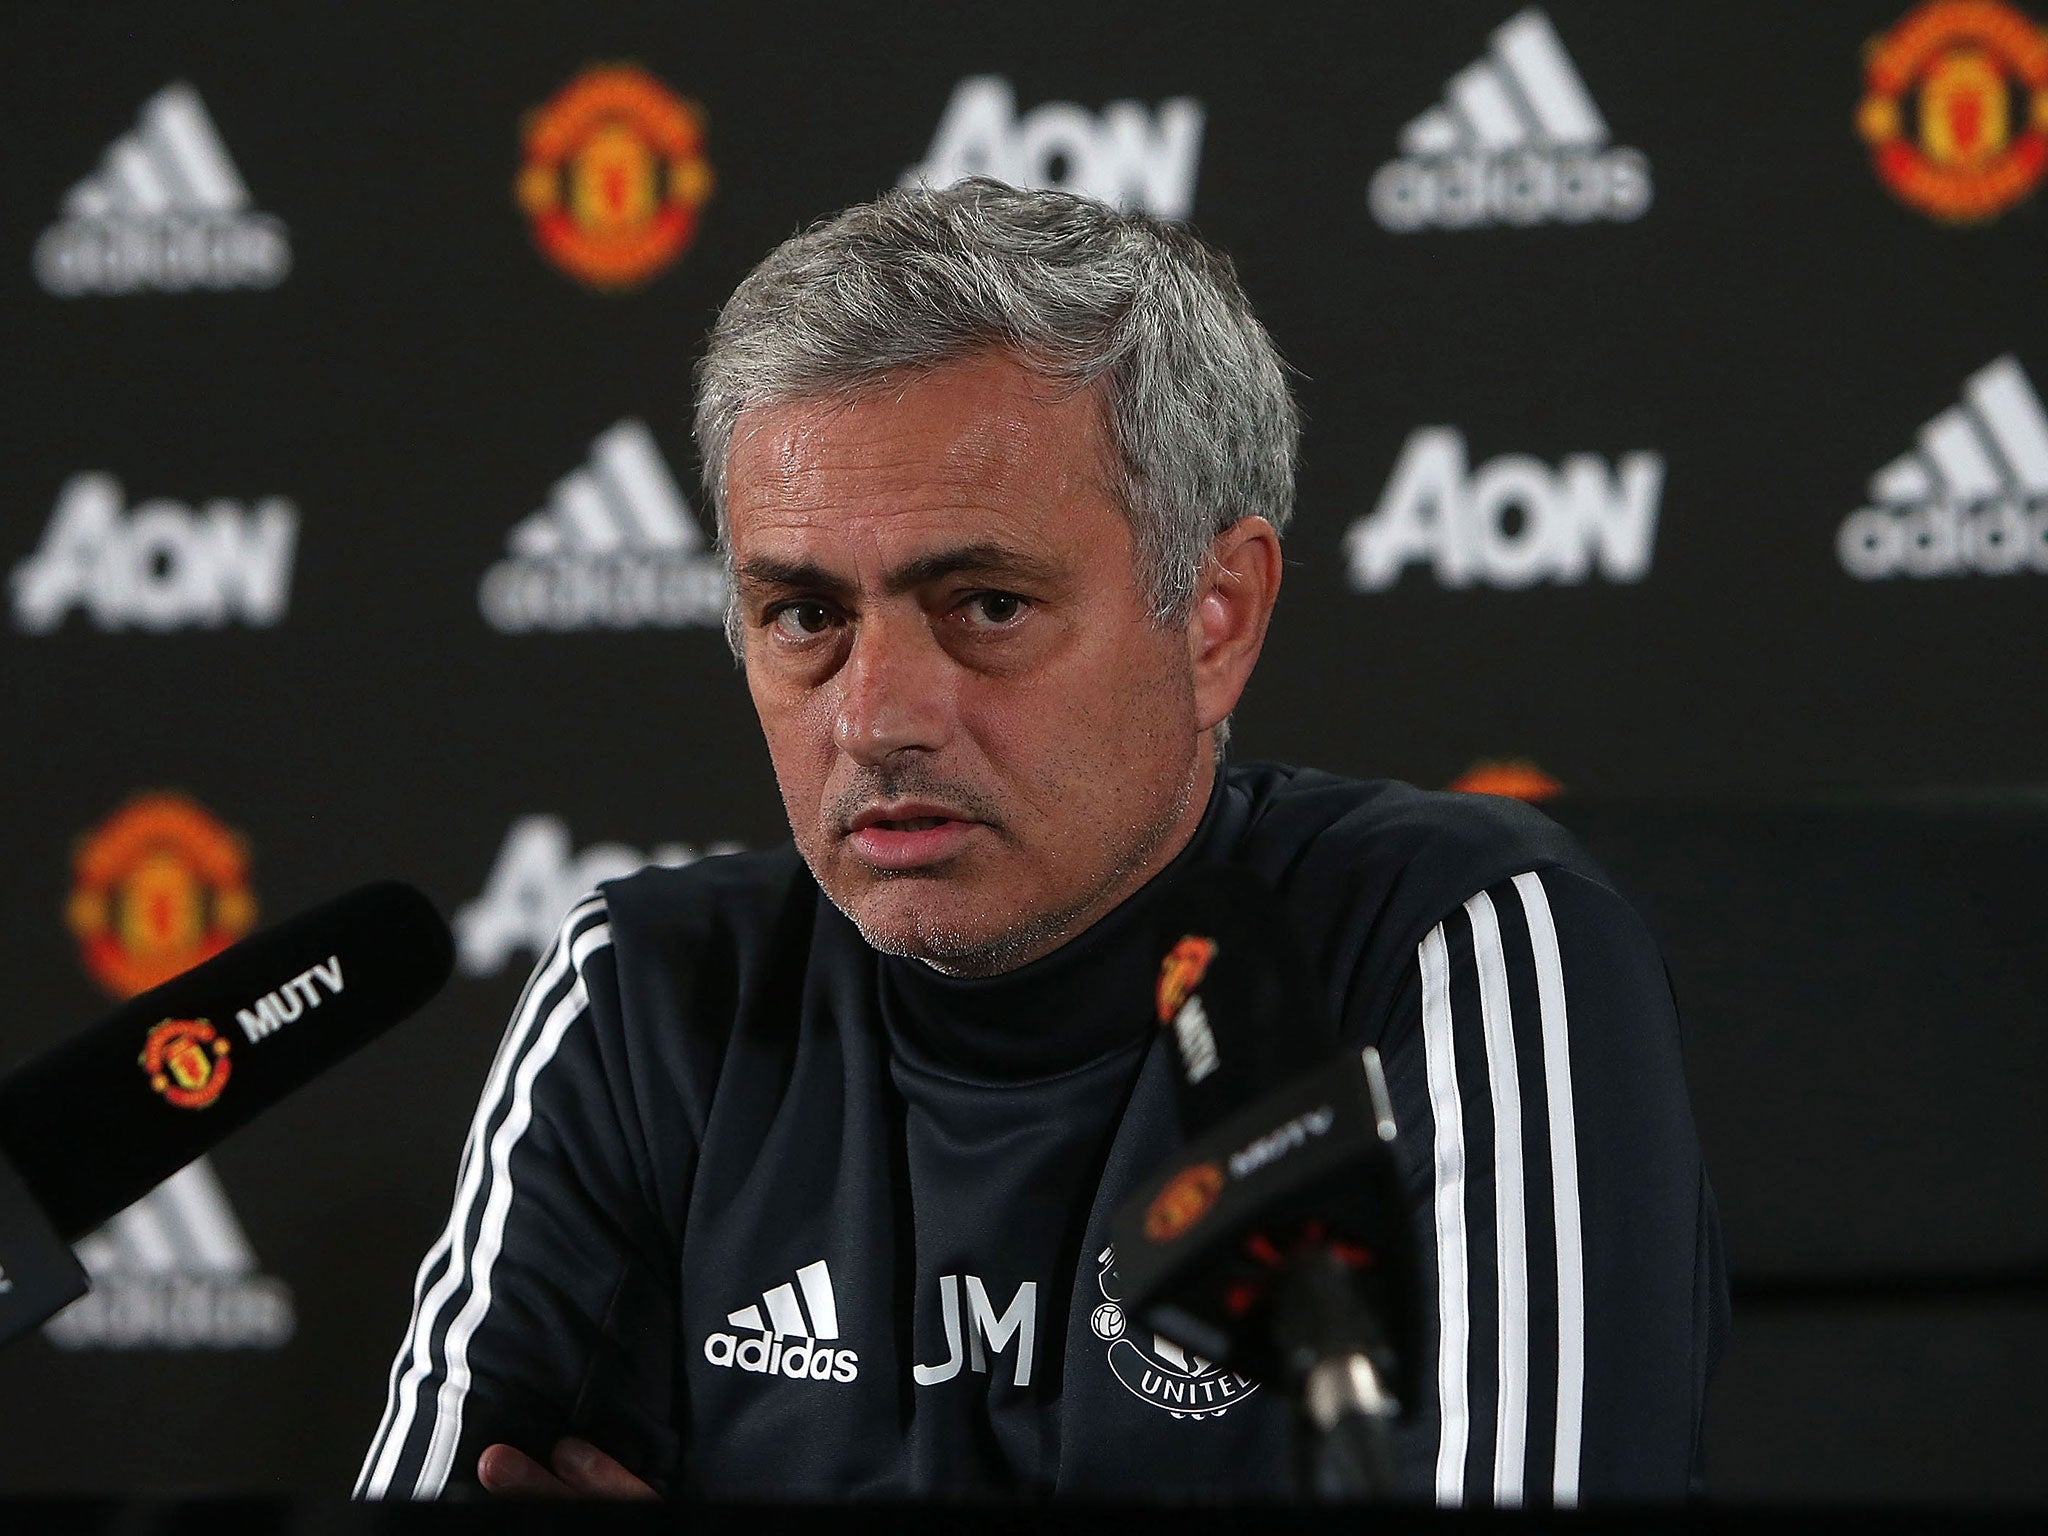 Jose Mourinho has sought to play down the meeting with Chelsea this weekend